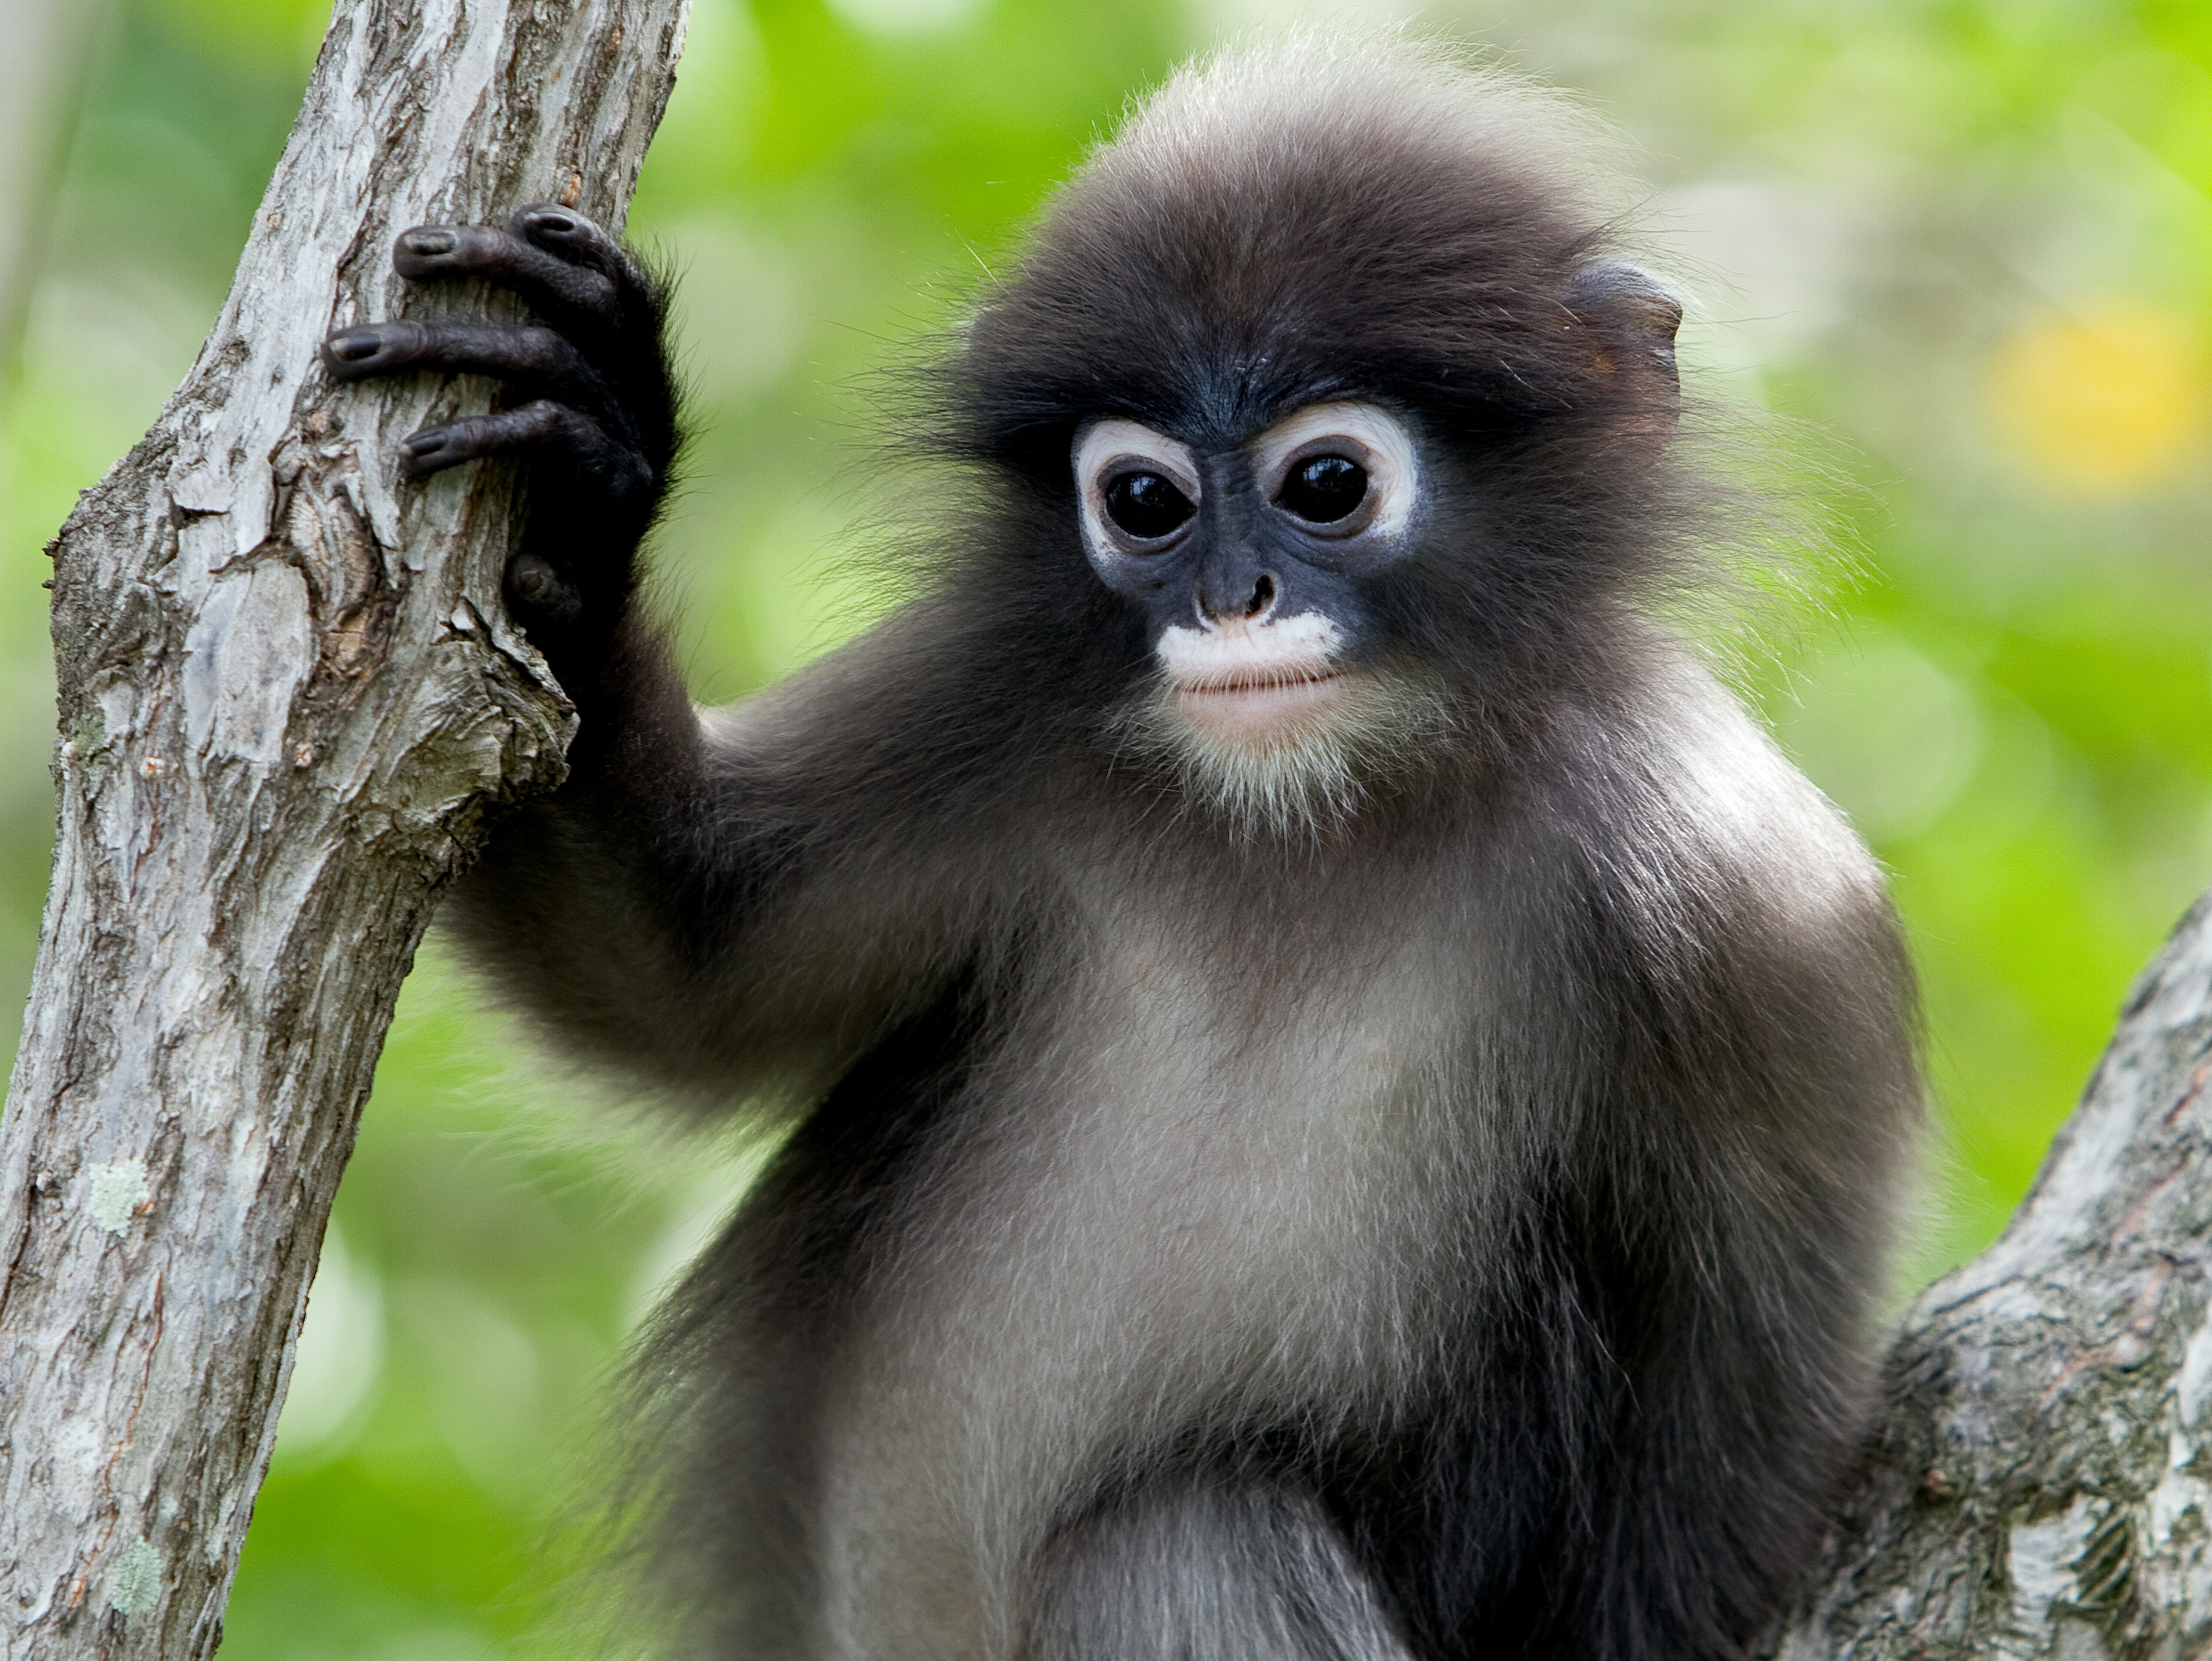 206 Dusky Leaf Monkey Photos, Pictures And Background Images For Free  Download - Pngtree